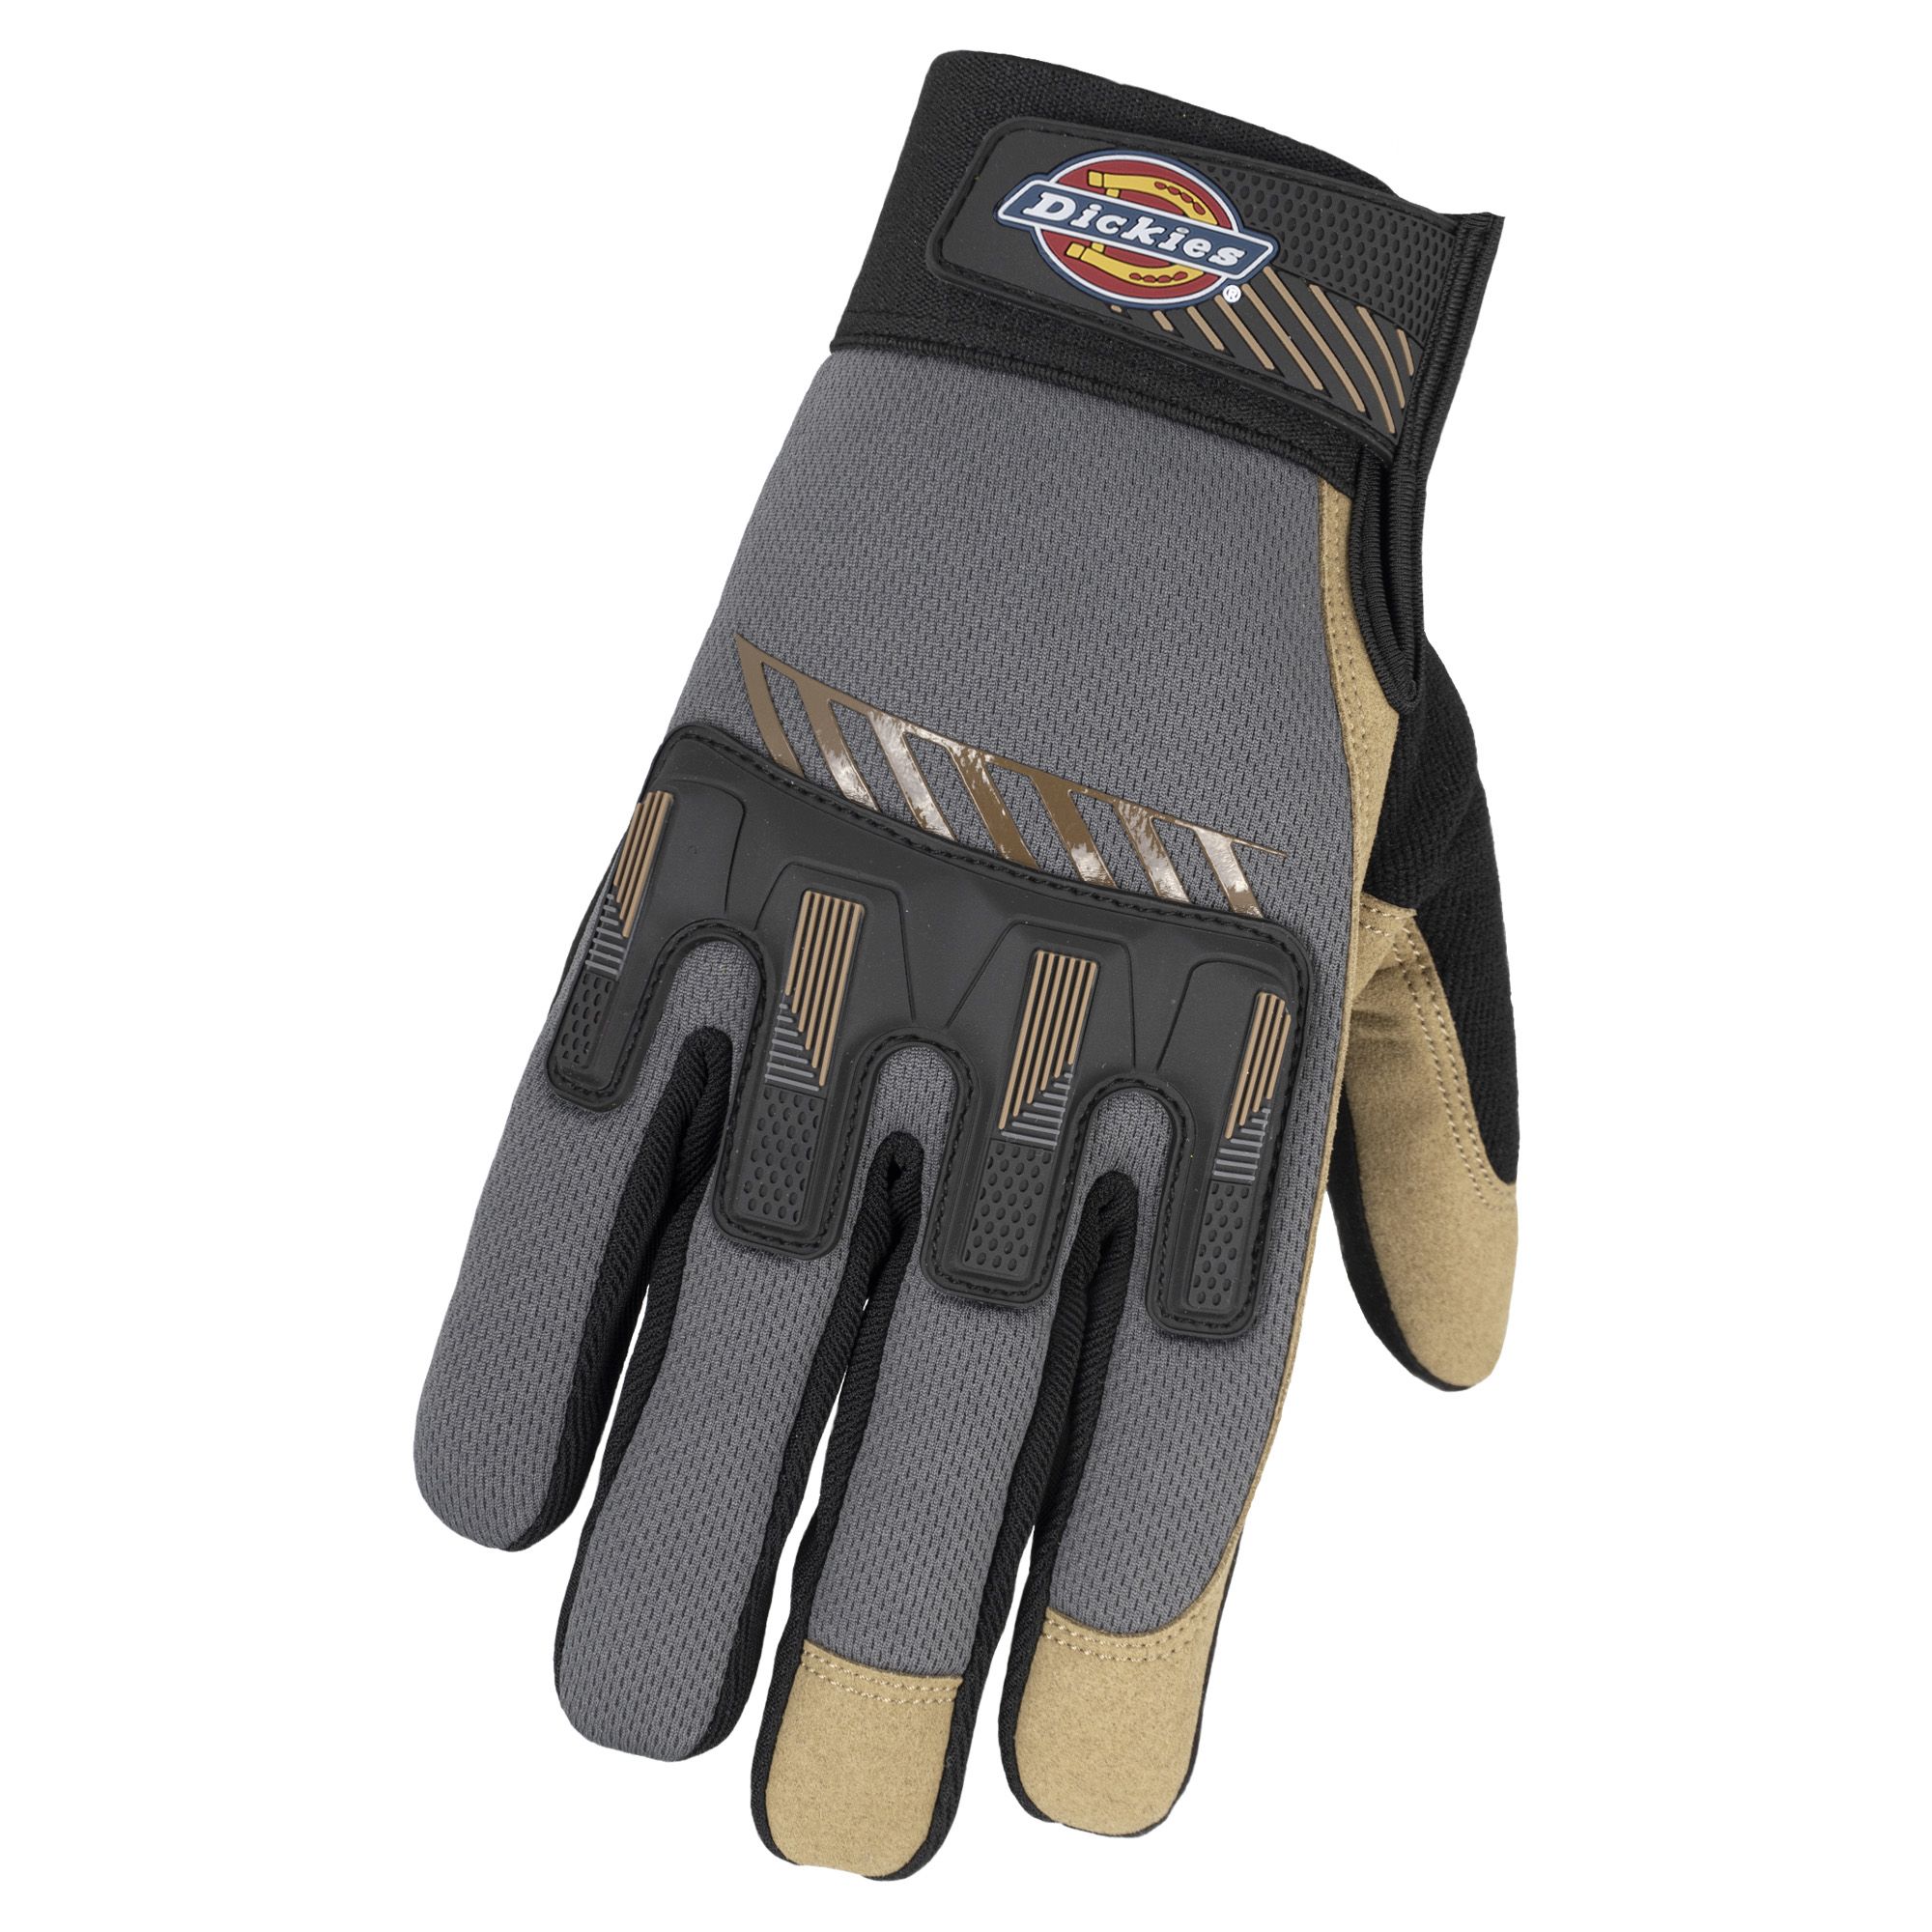 Dickies Impact Resistant High Performance Work Gloves with Terry Cloth Thumb and Wrist Strap